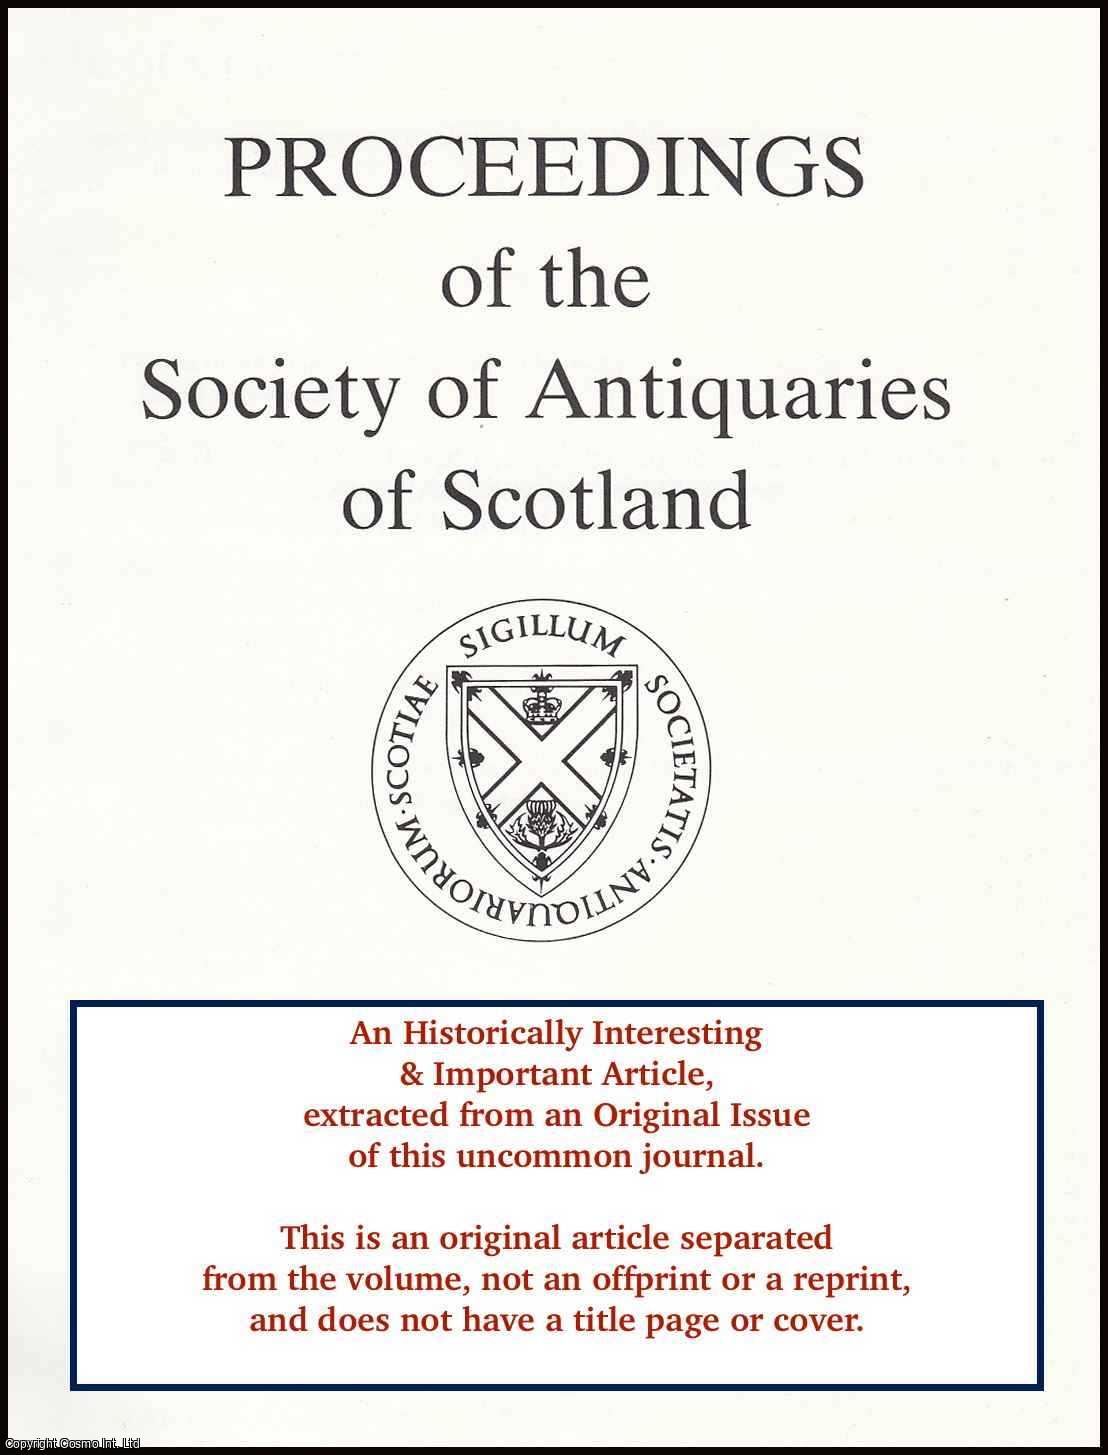 Daniel A & others - Carronbridge, Dumfries and Galloway: The Excavation of Bronze Age Cremations, Iron Age Settlements and a Roman Camp. An original article from the Proceedings of the Society of Antiquaries of Scotland, 1994.